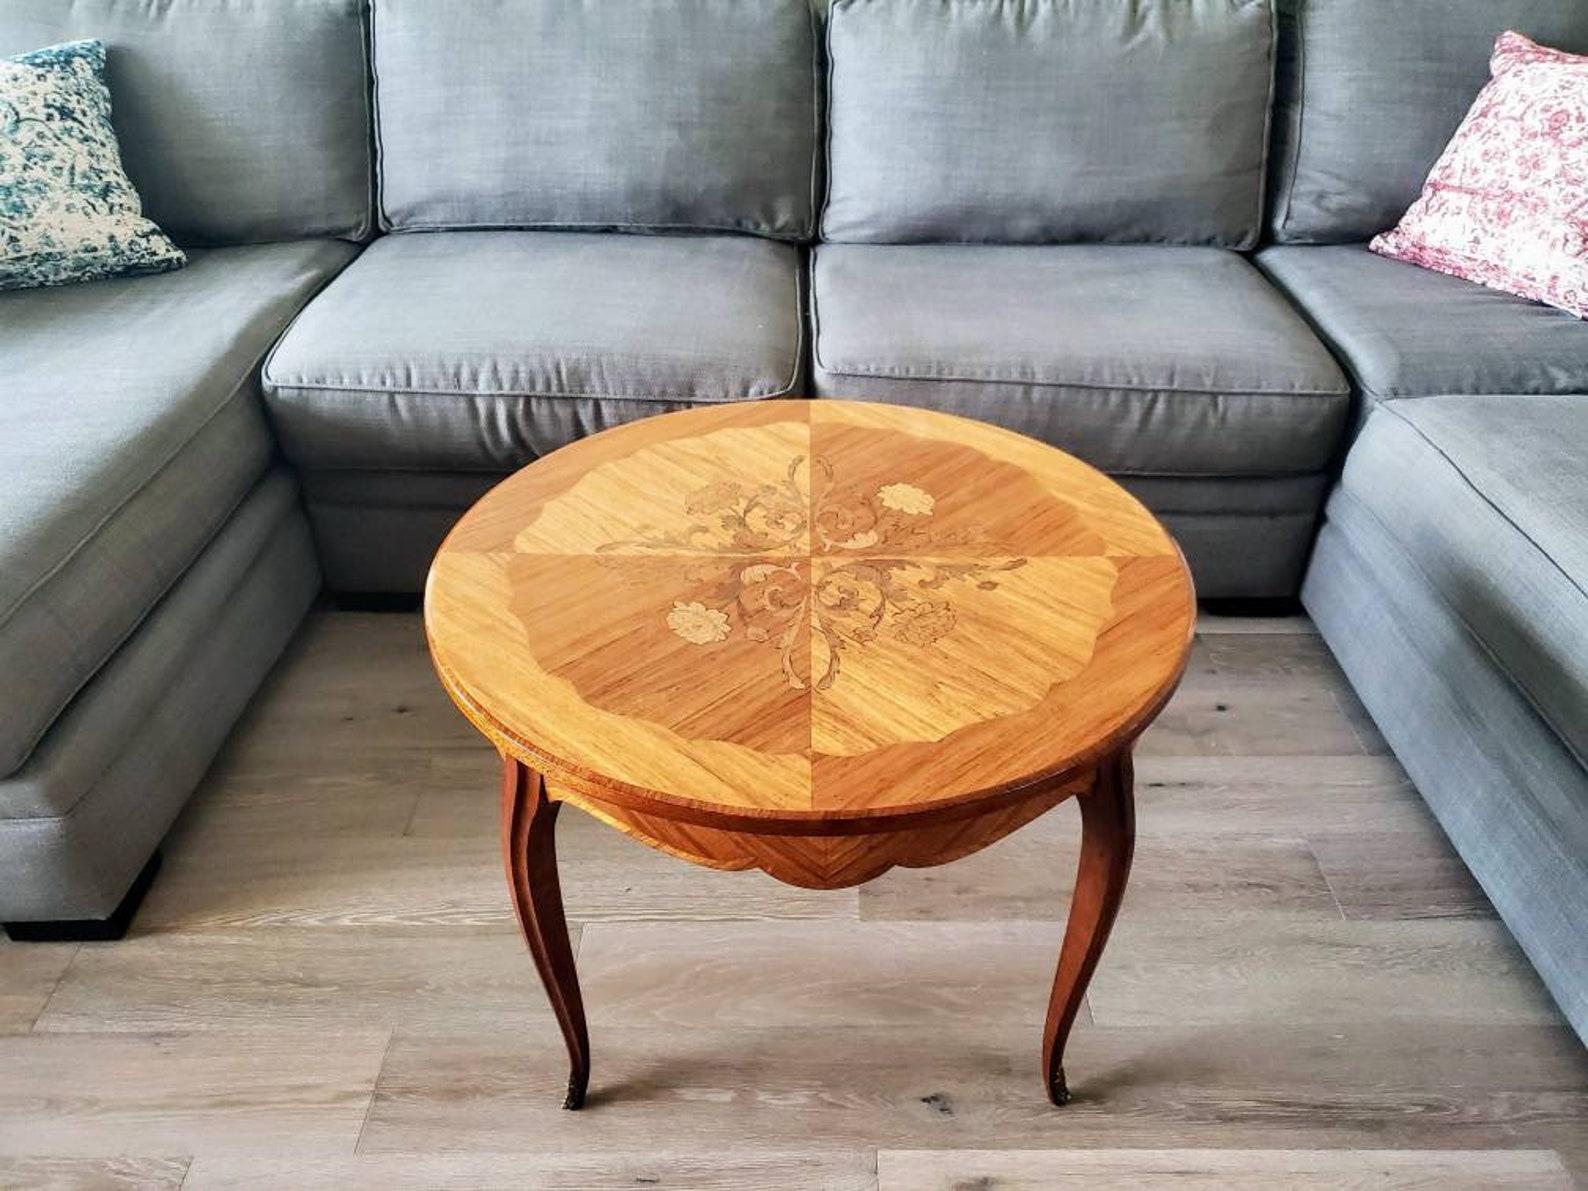 An elegant round occasional table, handcrafted in France in the mid-20th century, having a solid wooden frame with exquisitely inlaid circular tabletop with fanciful scrollwork, floral and fiolate marquetry motif, fabulous diamond parquetry and fine